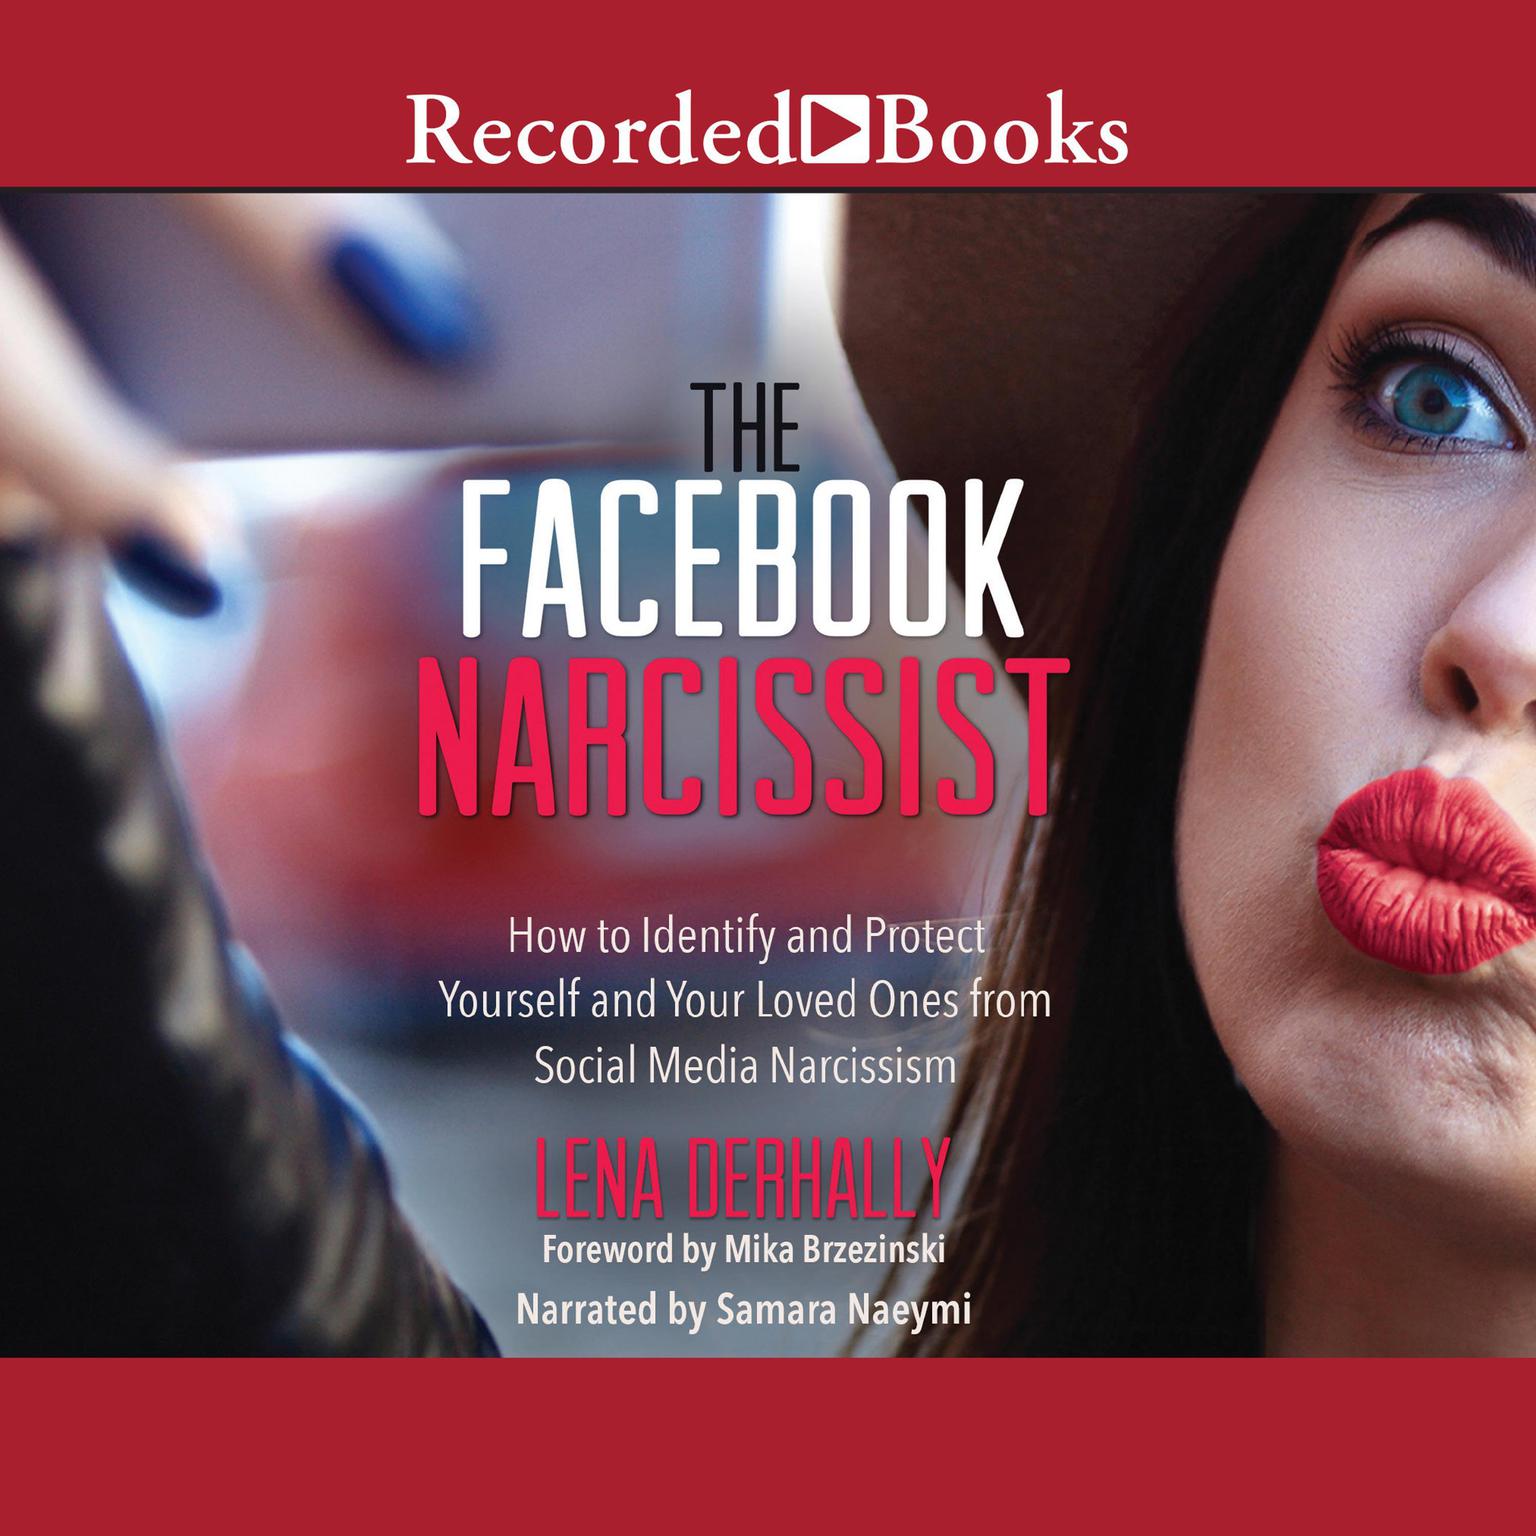 The Facebook Narcissist: How to Identify and Protect Yourself and Your Loved Ones from Social Media Narcissism Audiobook, by Lena Derhally